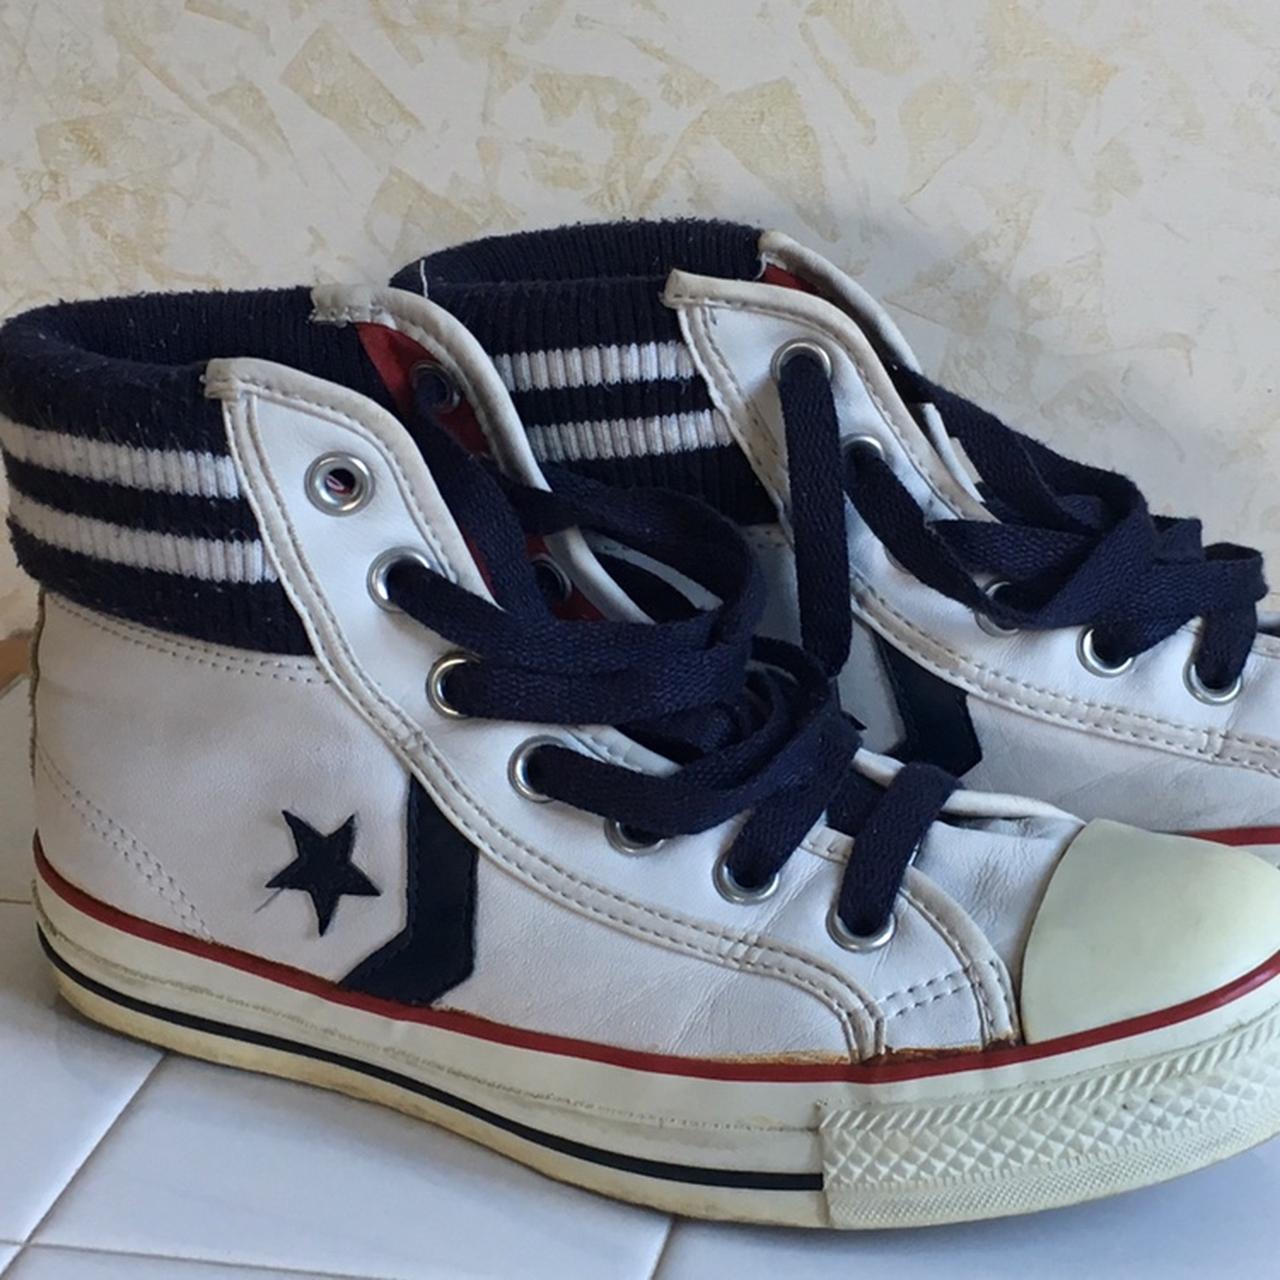 Converse Women's Navy and White Trainers